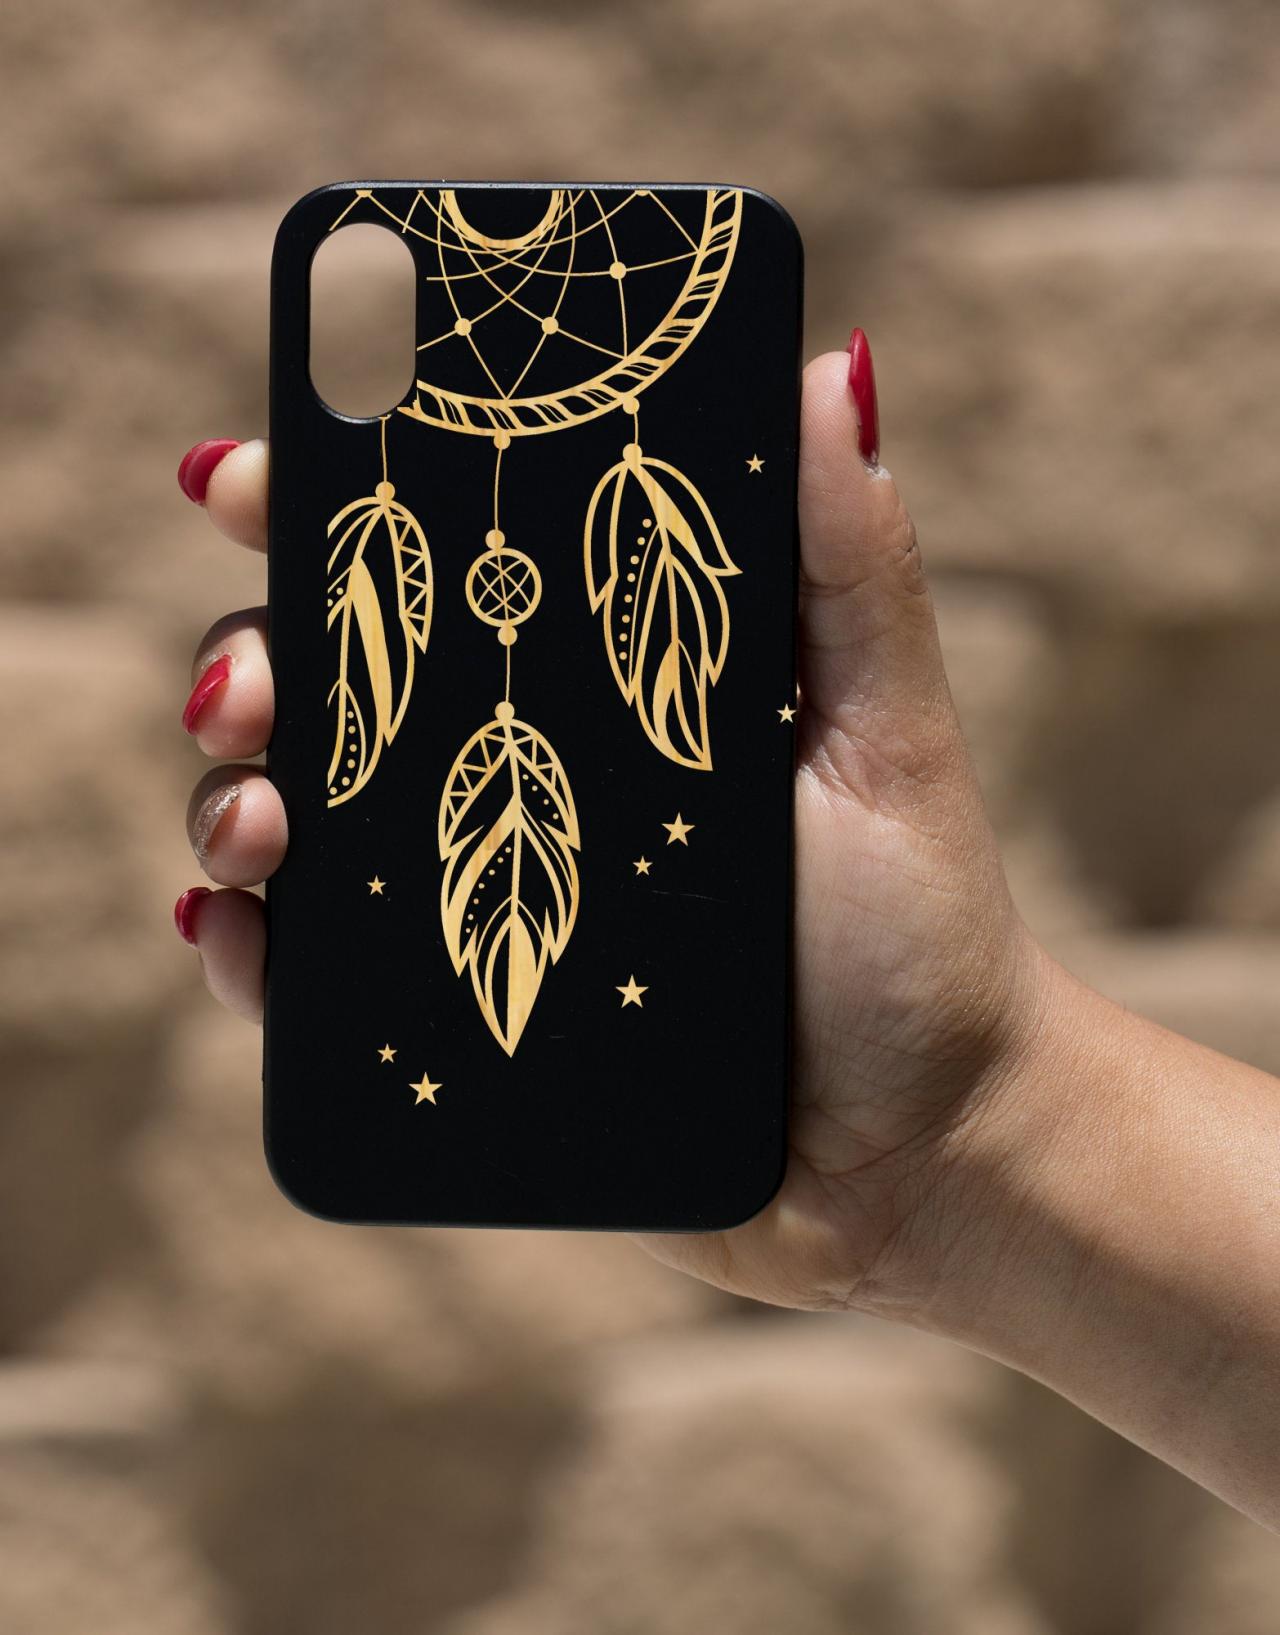 Dreamcatcher IPhone X Case, Engraved I phone X case, Wooden Engraved Iphone X Case, Iphone case, Beautiful Gift for here, unique